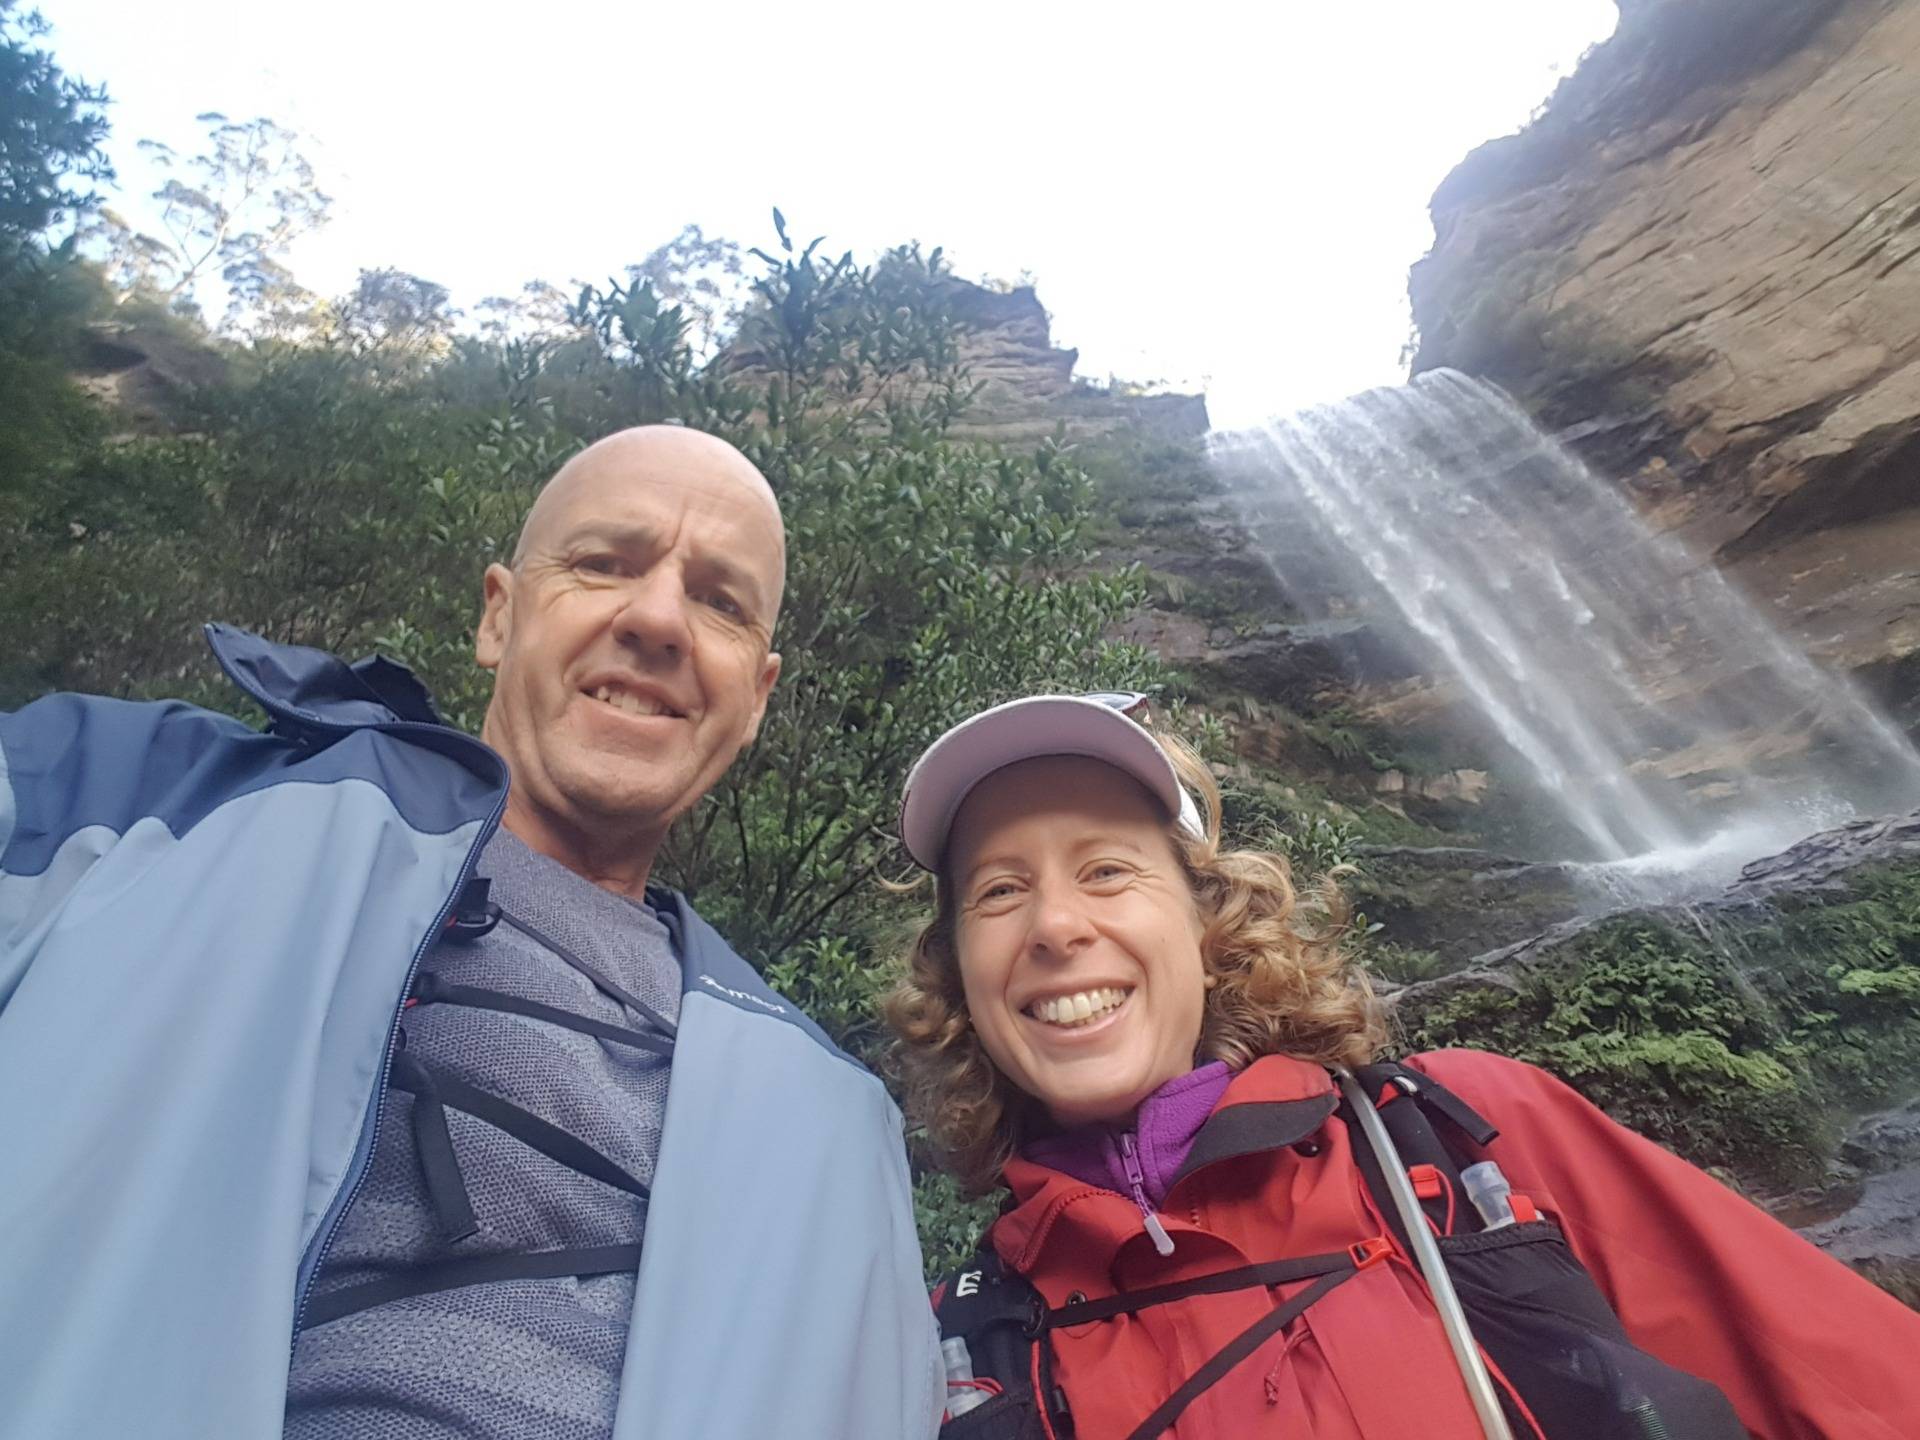 On Day 3, it was back to Katoomba Falls, where we got an awesome shot of this well known waterfall.